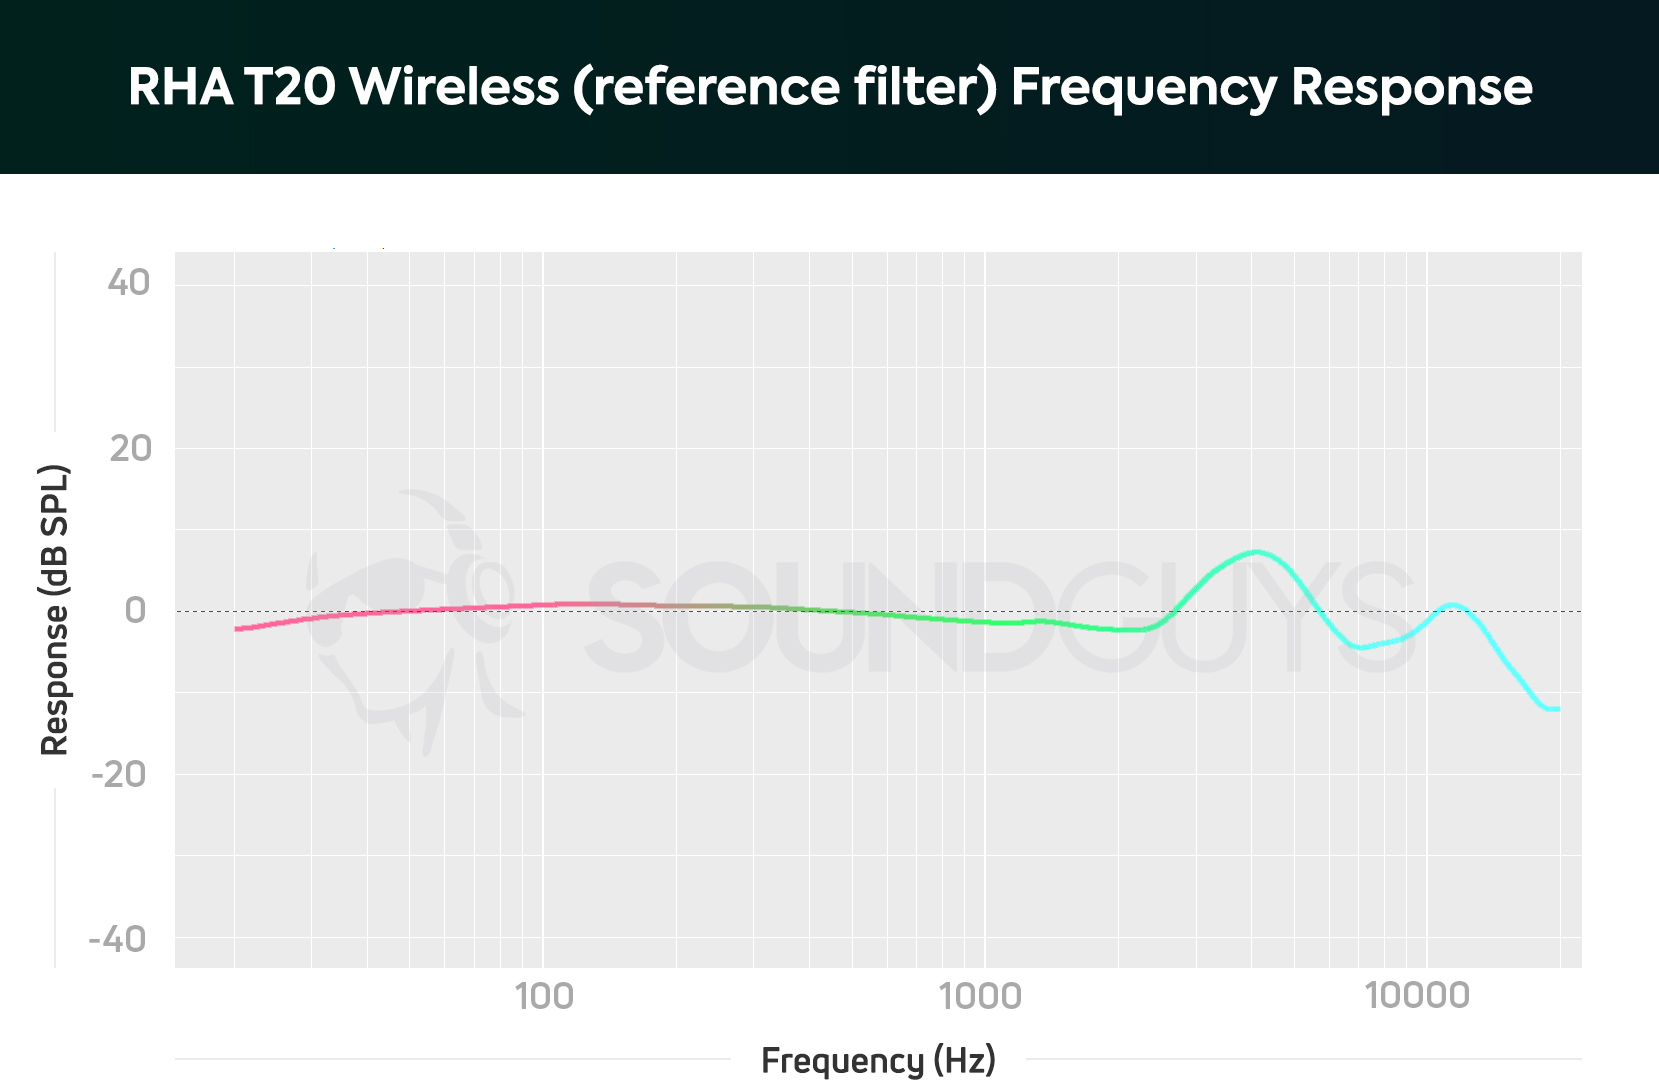 RHA T20 Wireless frequency response chart with the reference filter installed.